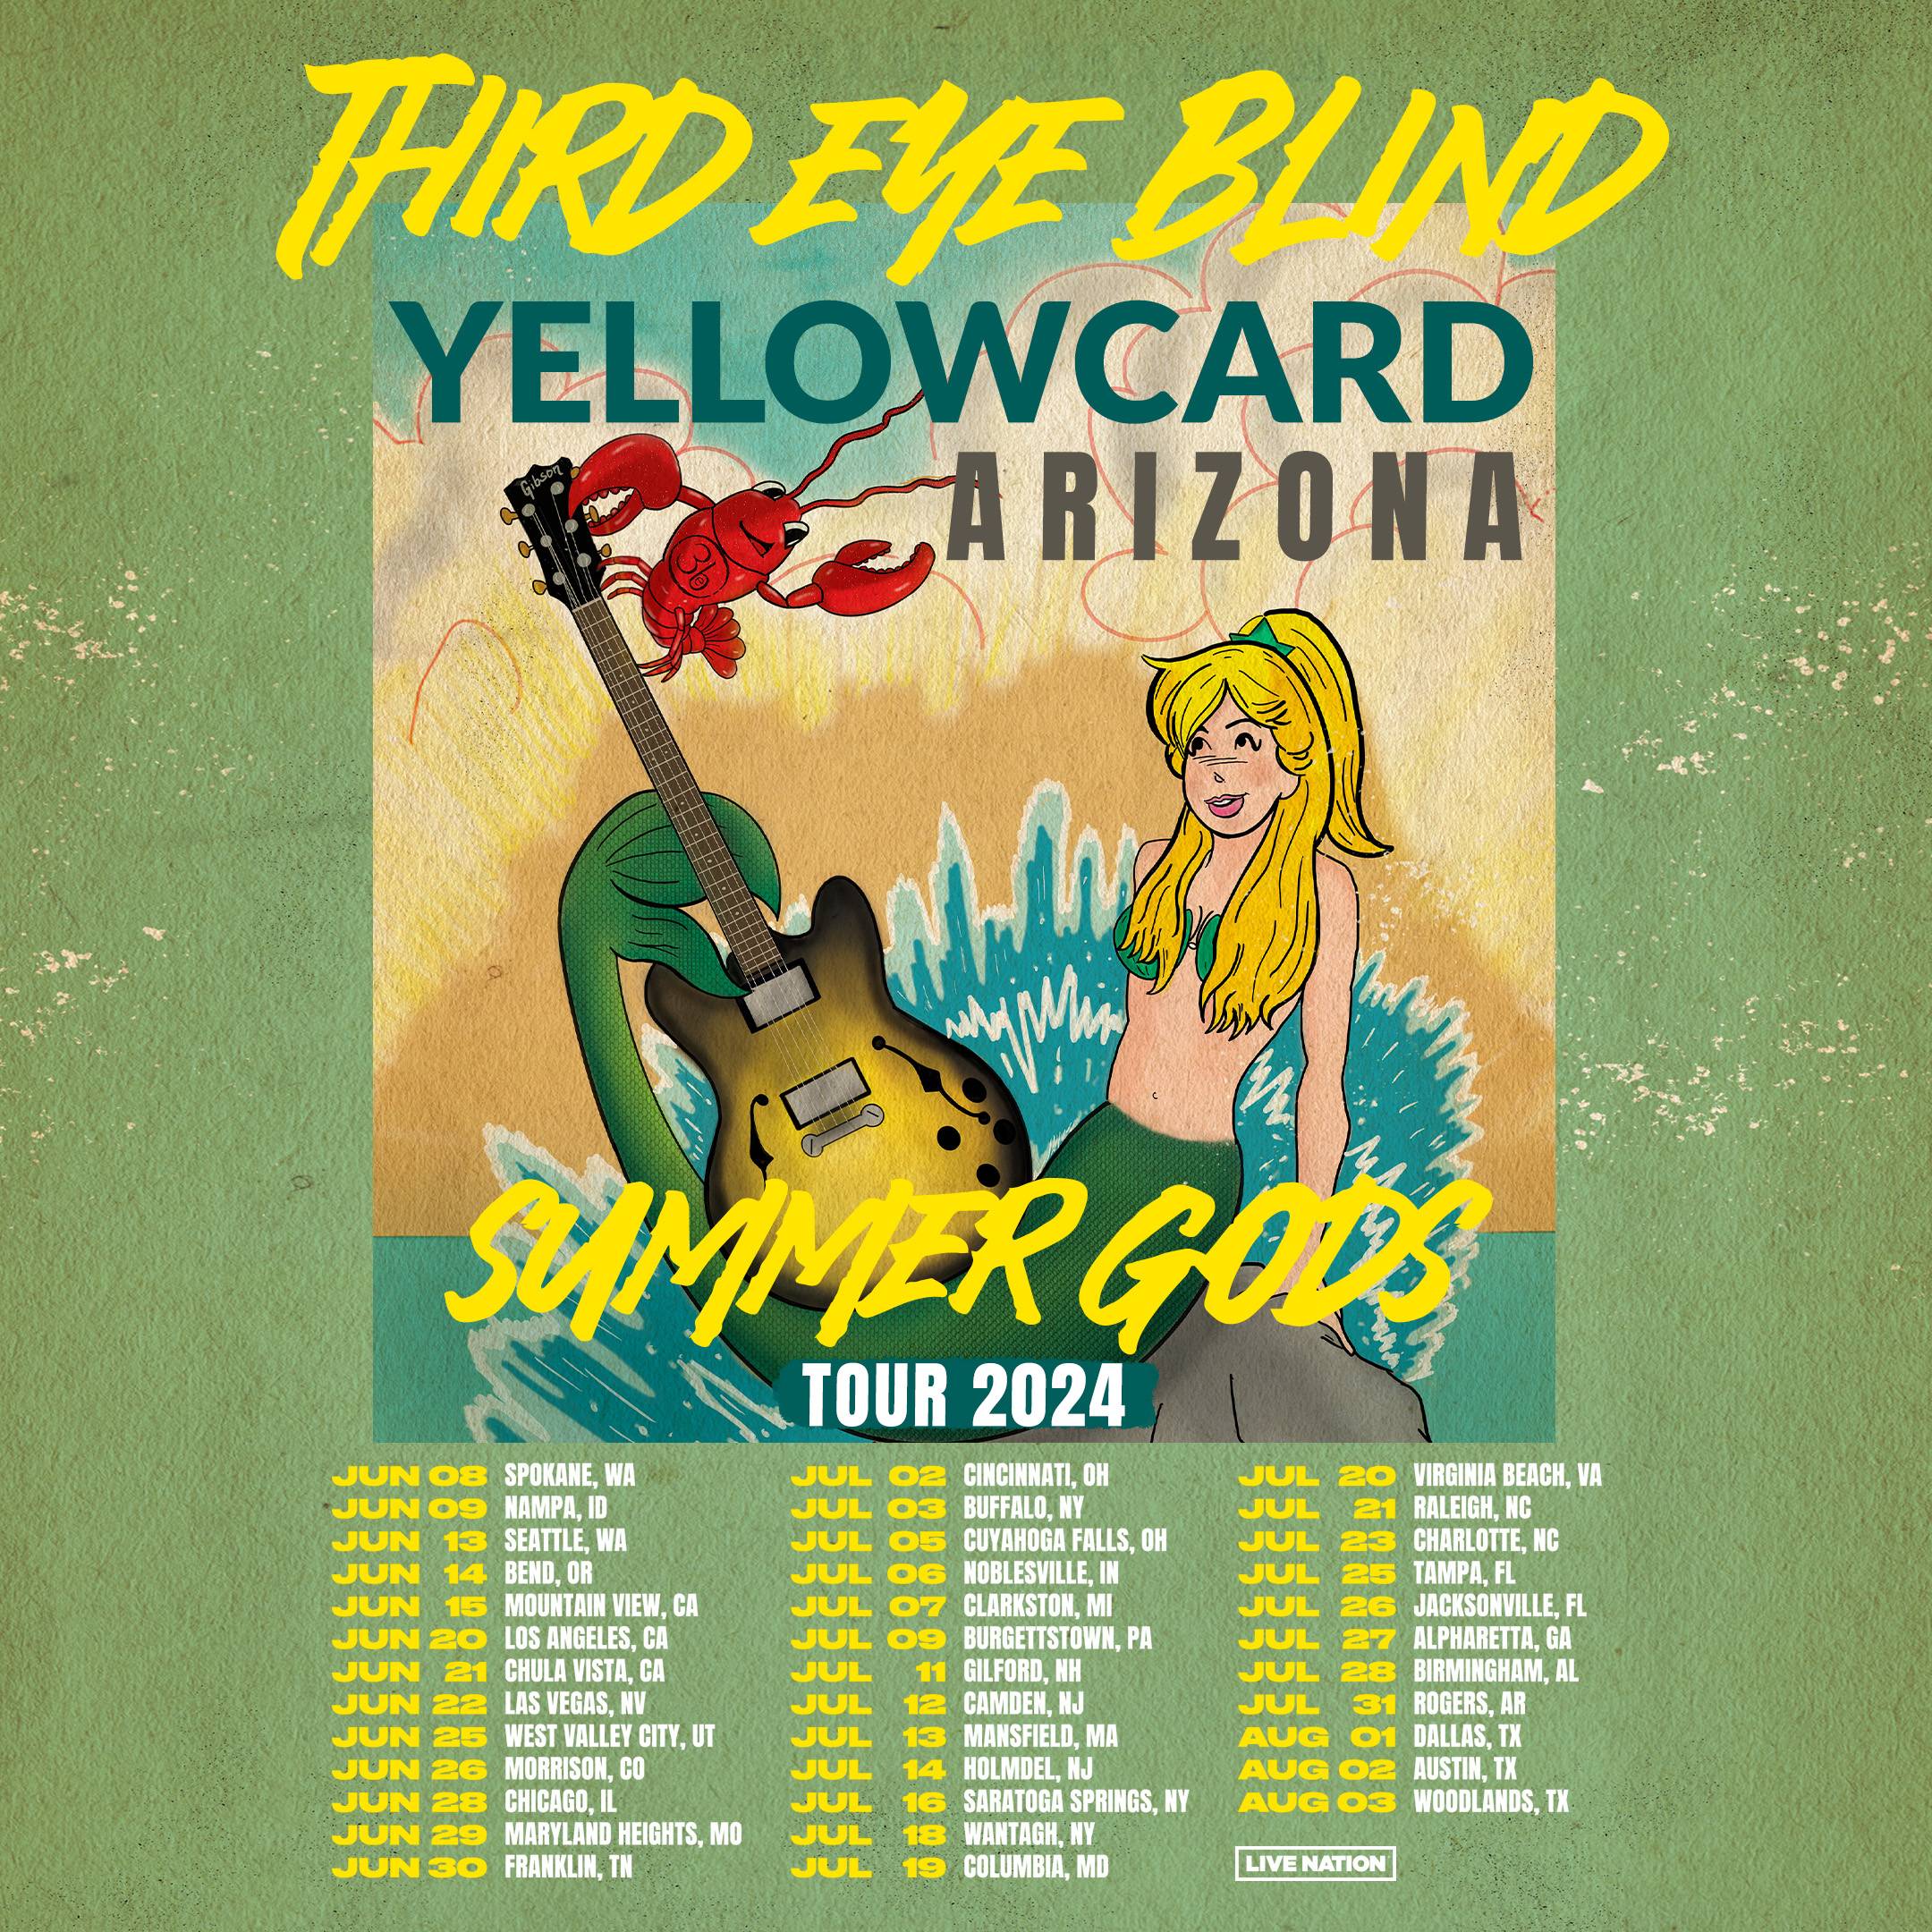 Third Eye Blind and Yellowcard 2024 tour poster